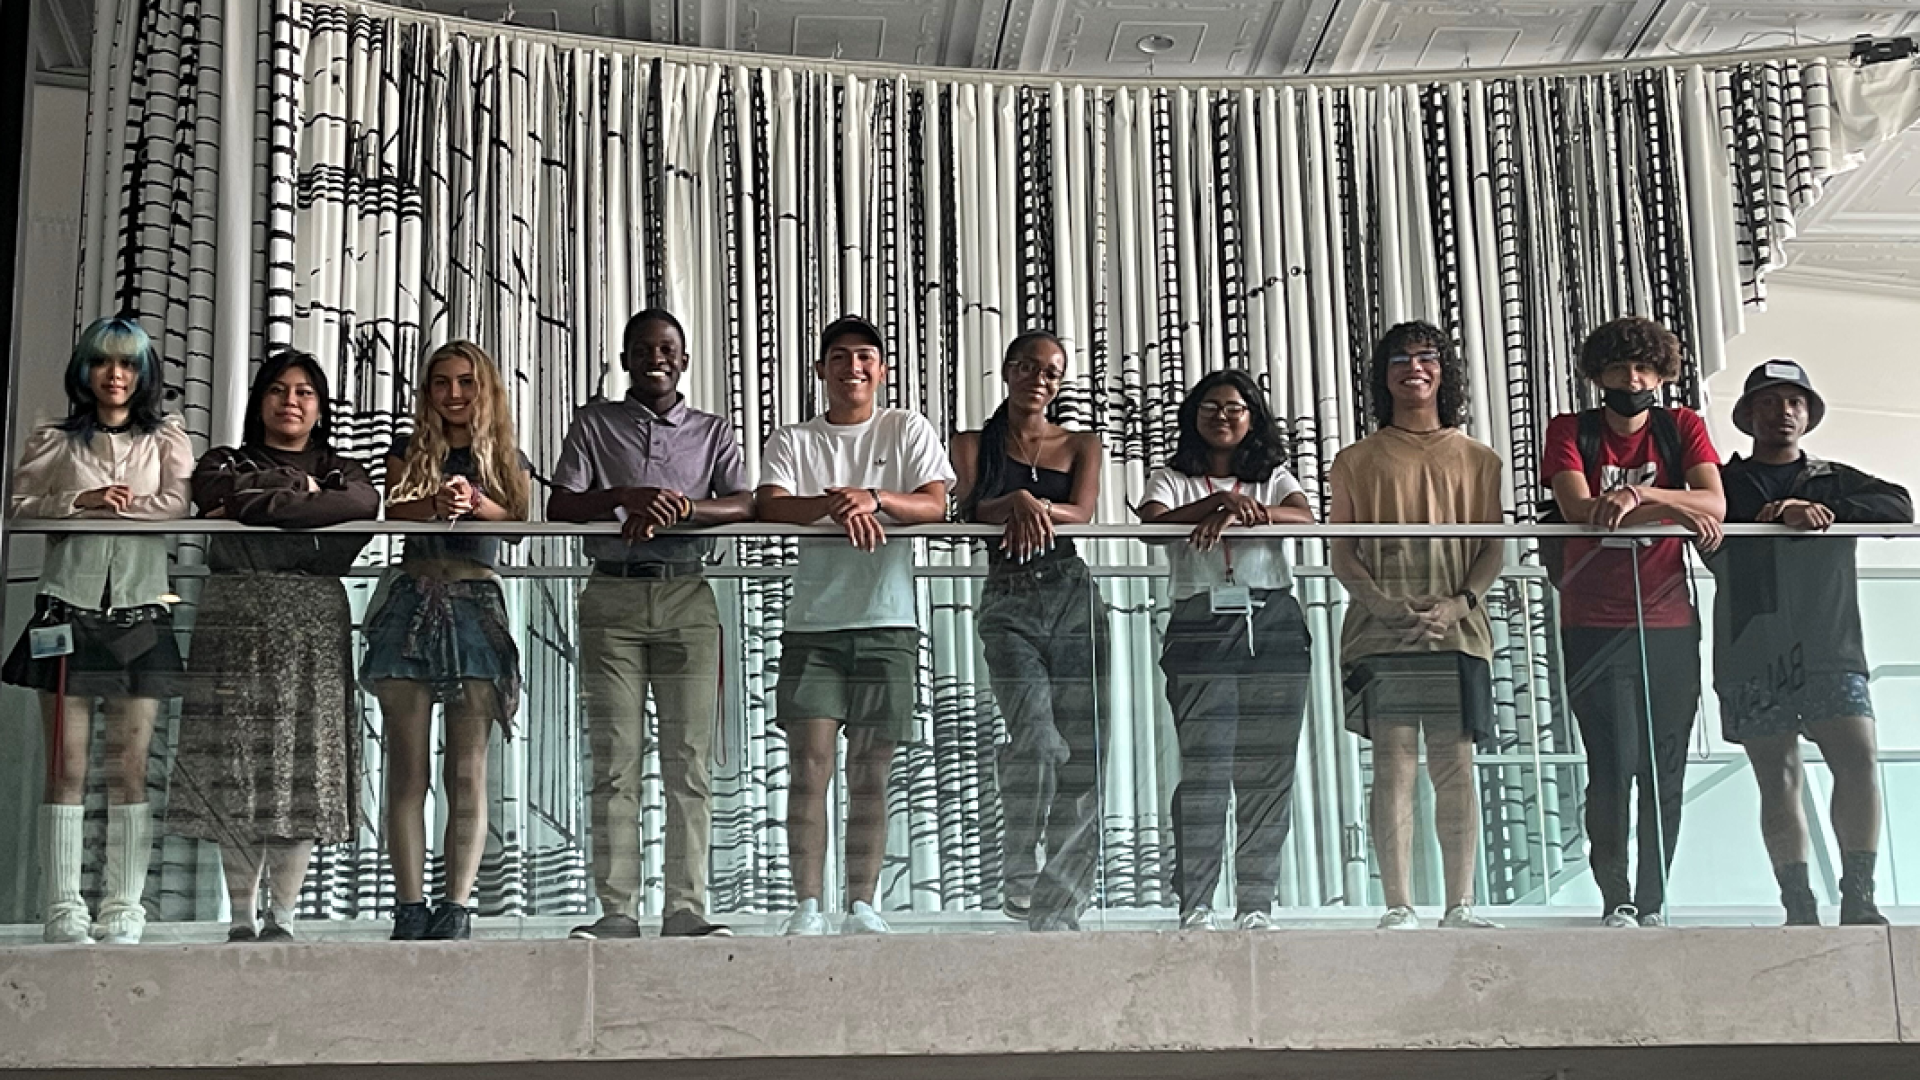 People standing at the edge of a glass staircase railing.